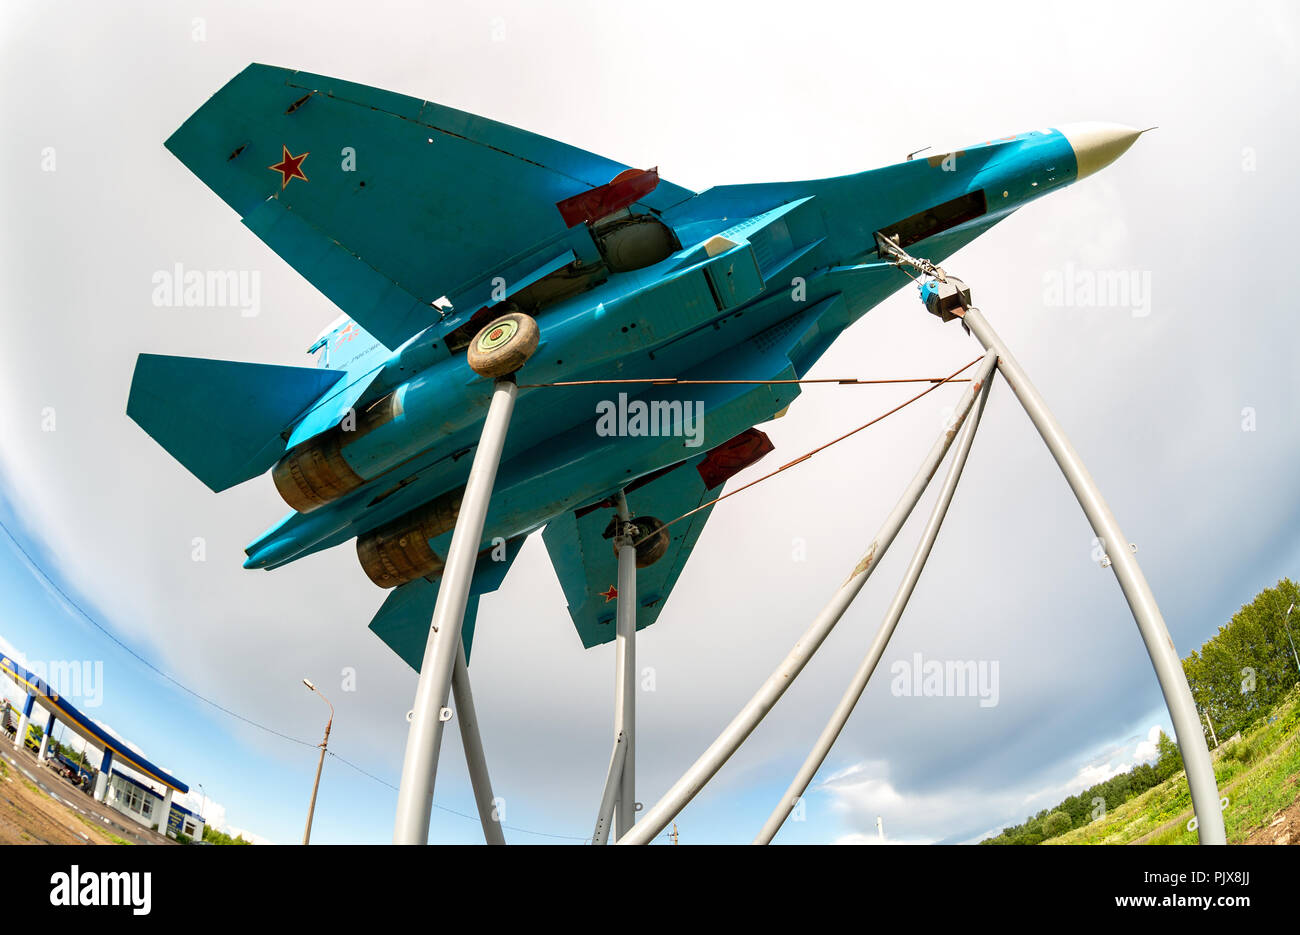 Bologoe, Russia - July 8, 2017: Russian fighter SU-27 as monument against the cloudy sky Stock Photo